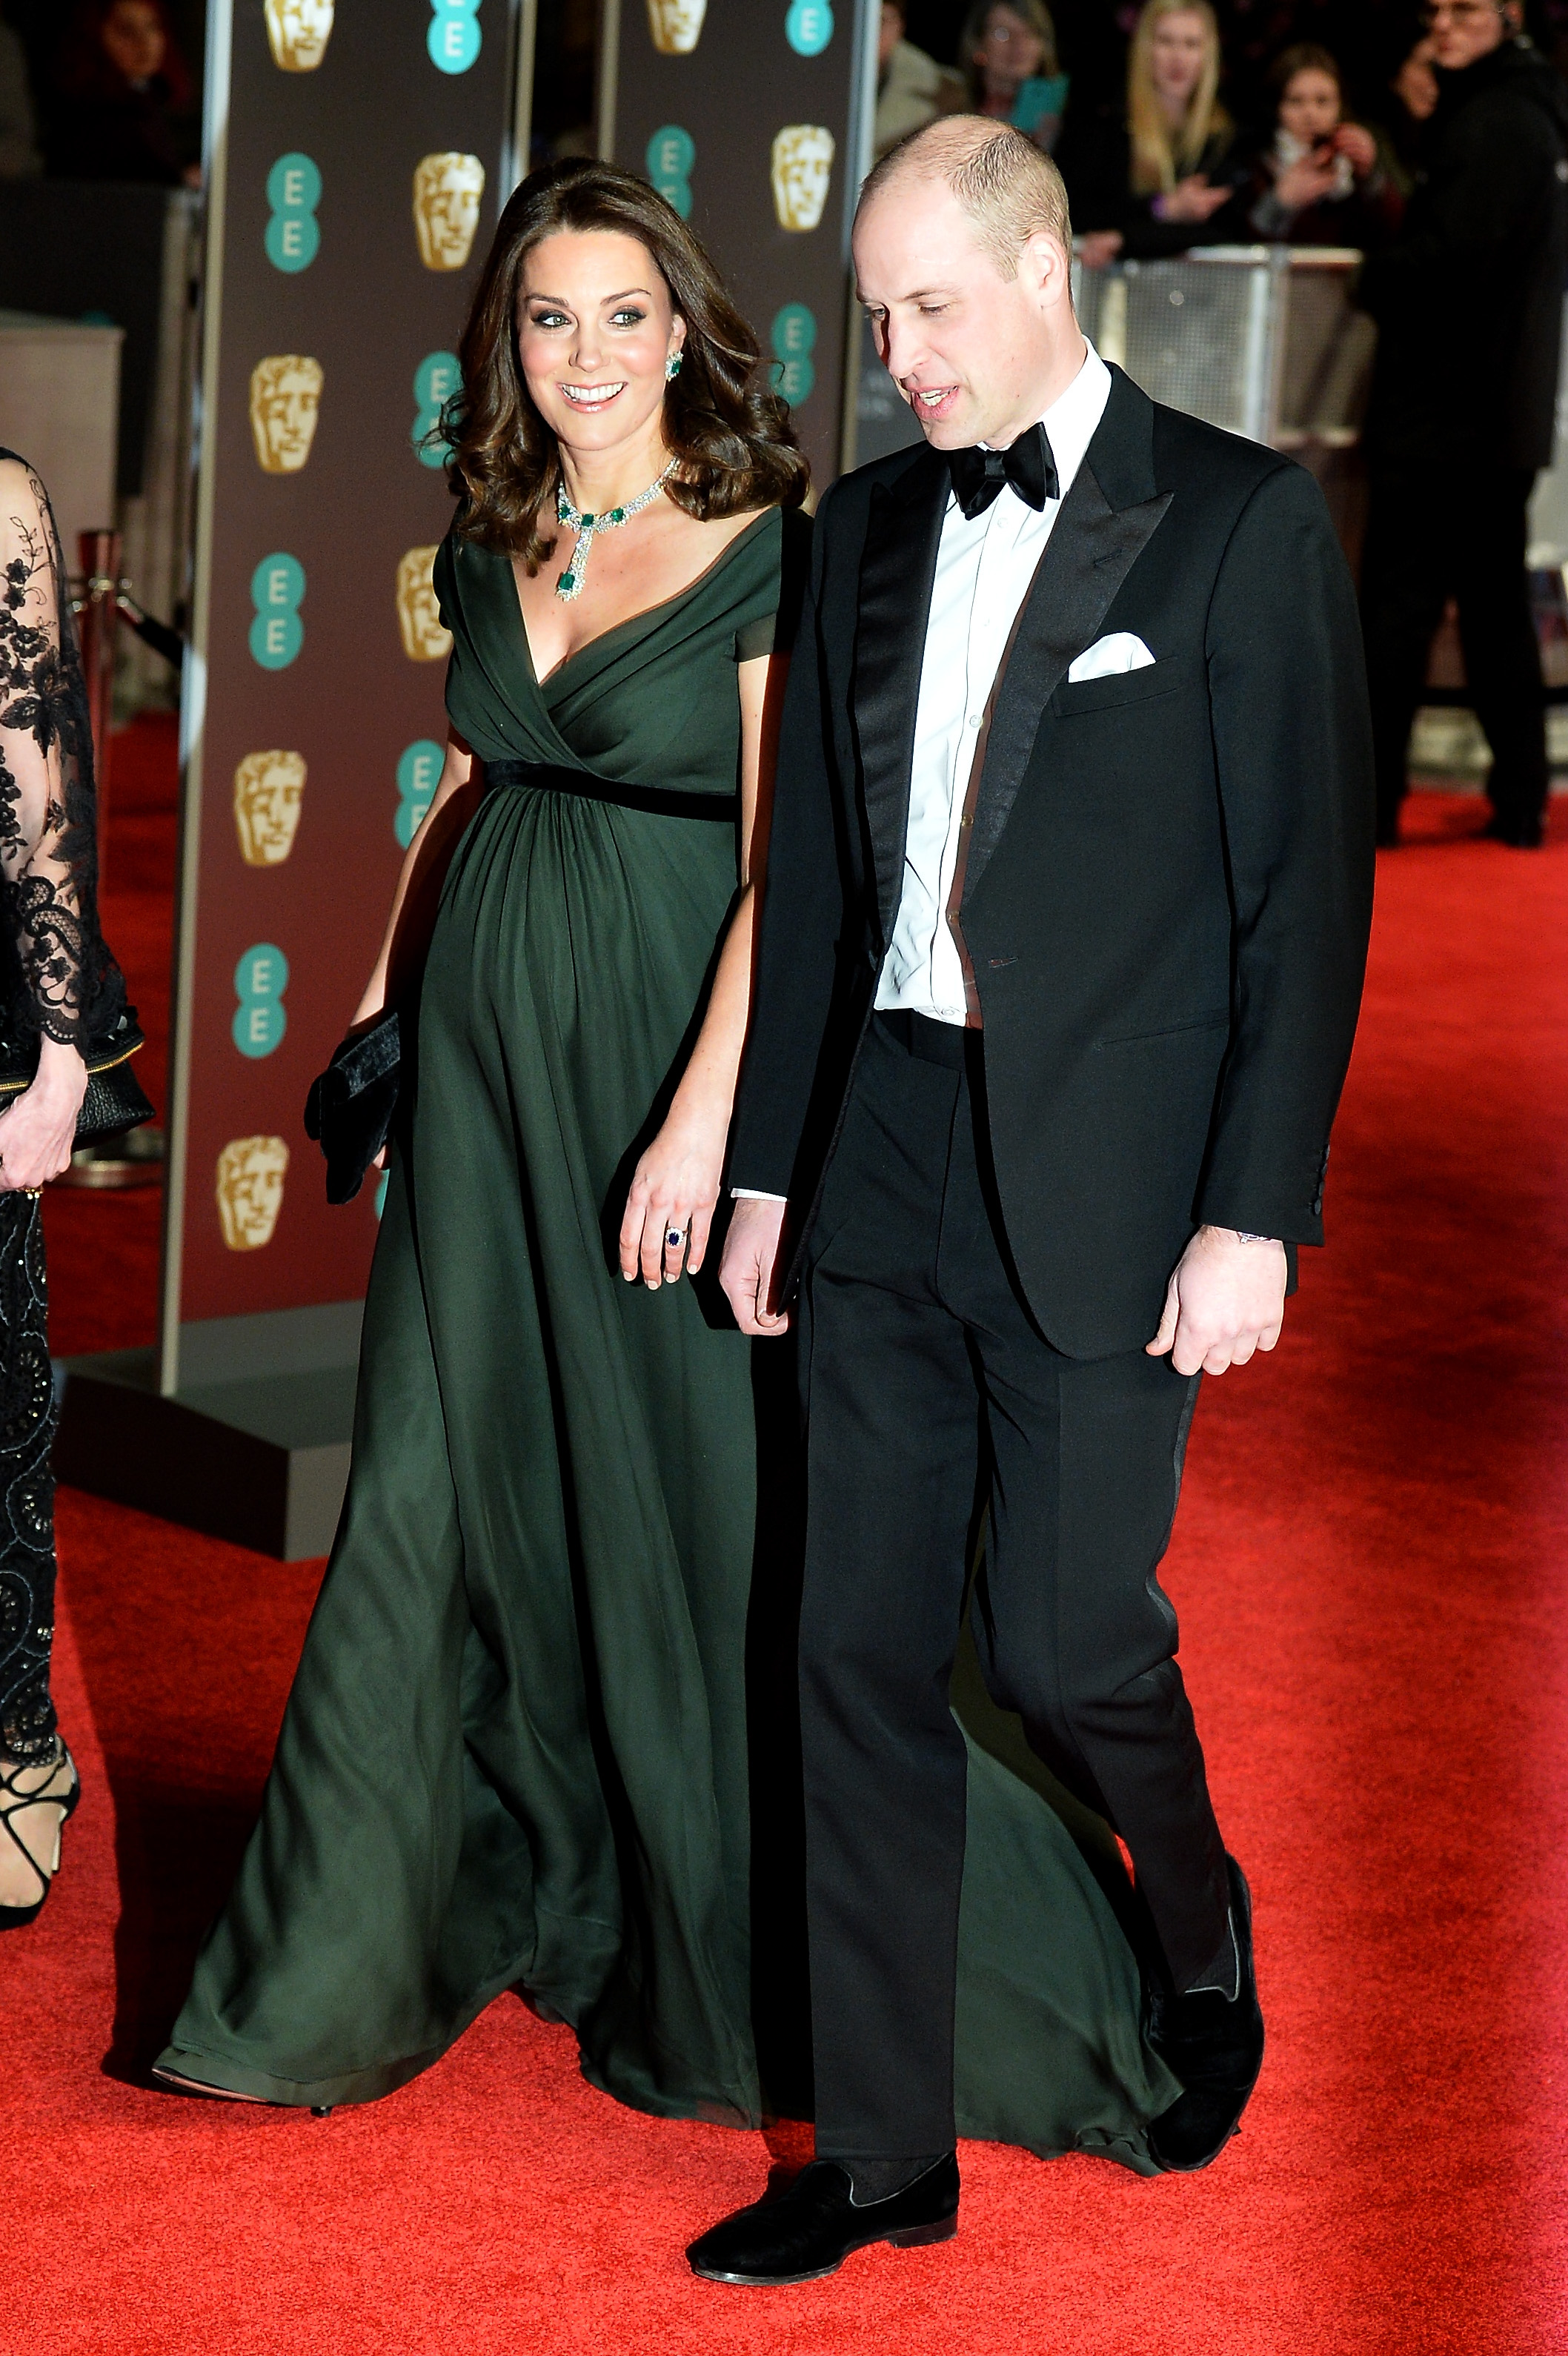 LONDON, ENGLAND - FEBRUARY 18:  Prince William, Duke of Cambridge and Catherine, Duchess of Cambridge attend the EE British Academy Film Awards (BAFTA) held at Royal Albert Hall on February 18, 2018 in London, England.  (Photo by Jeff Spicer/Jeff Spicer/Getty Images)